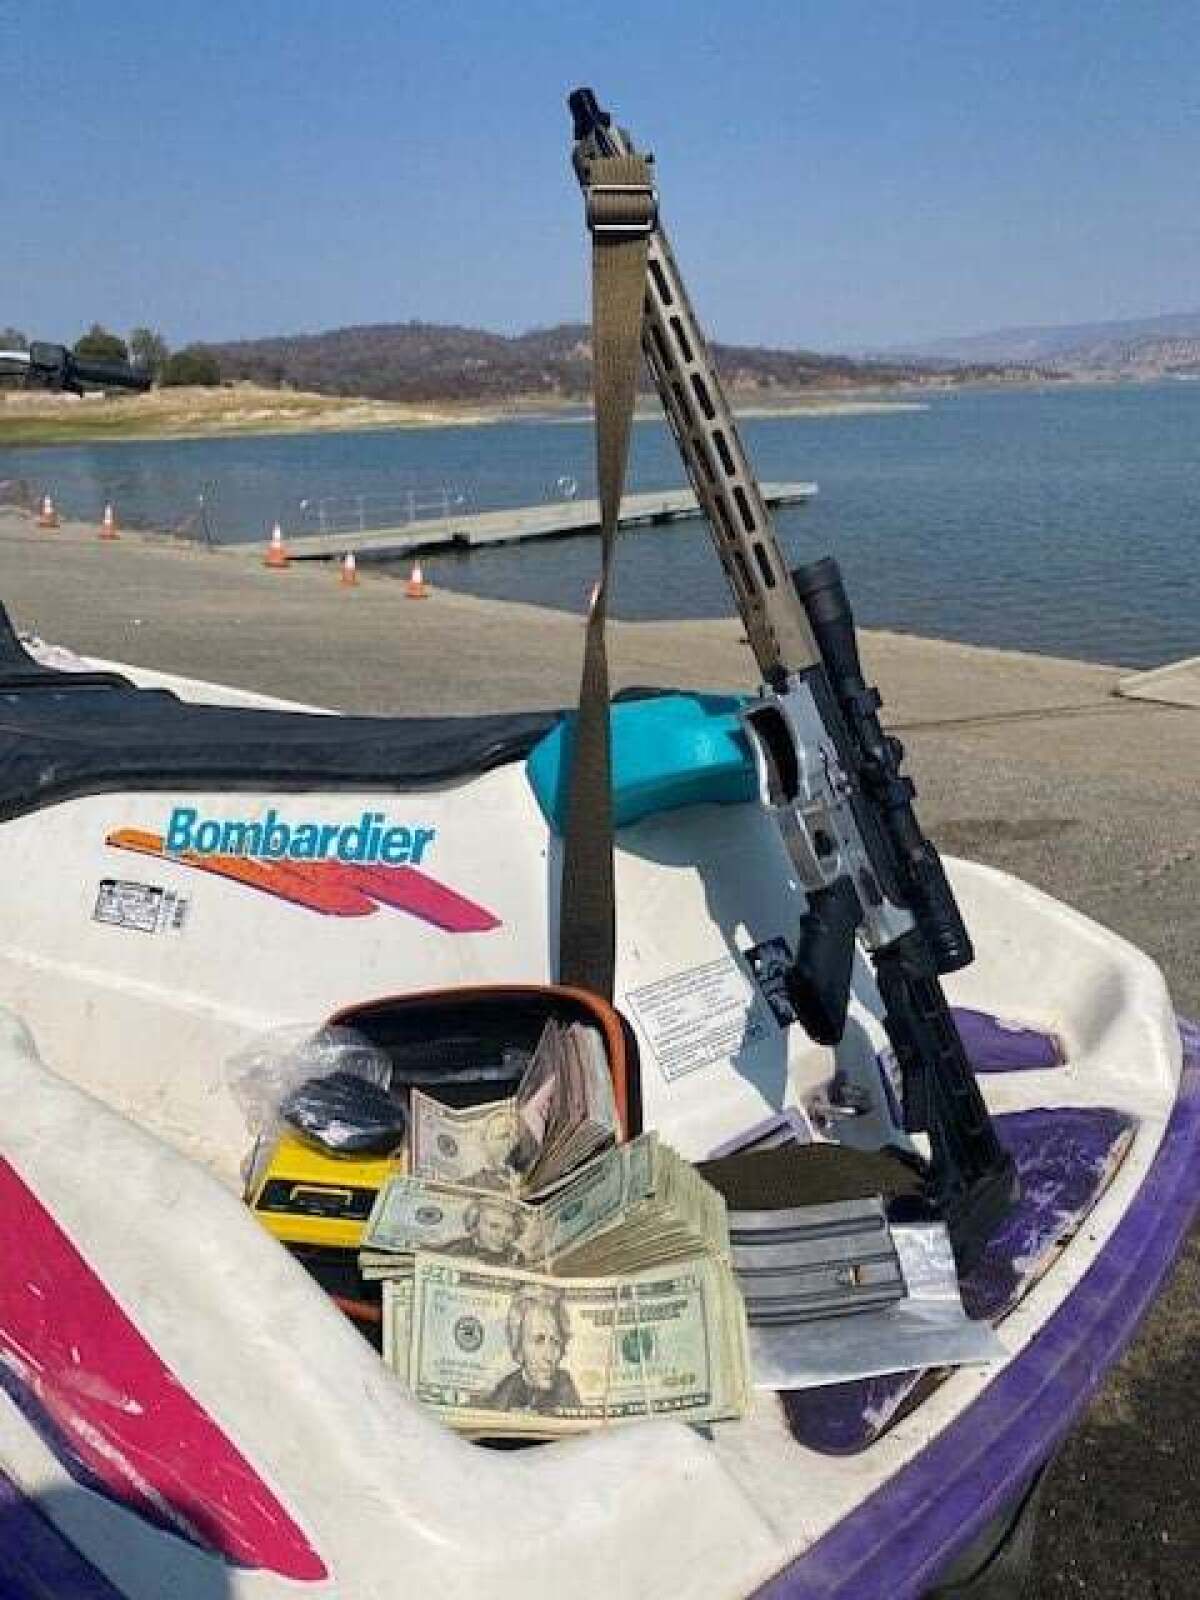 An AR-15 rifle and cash on a water scooter